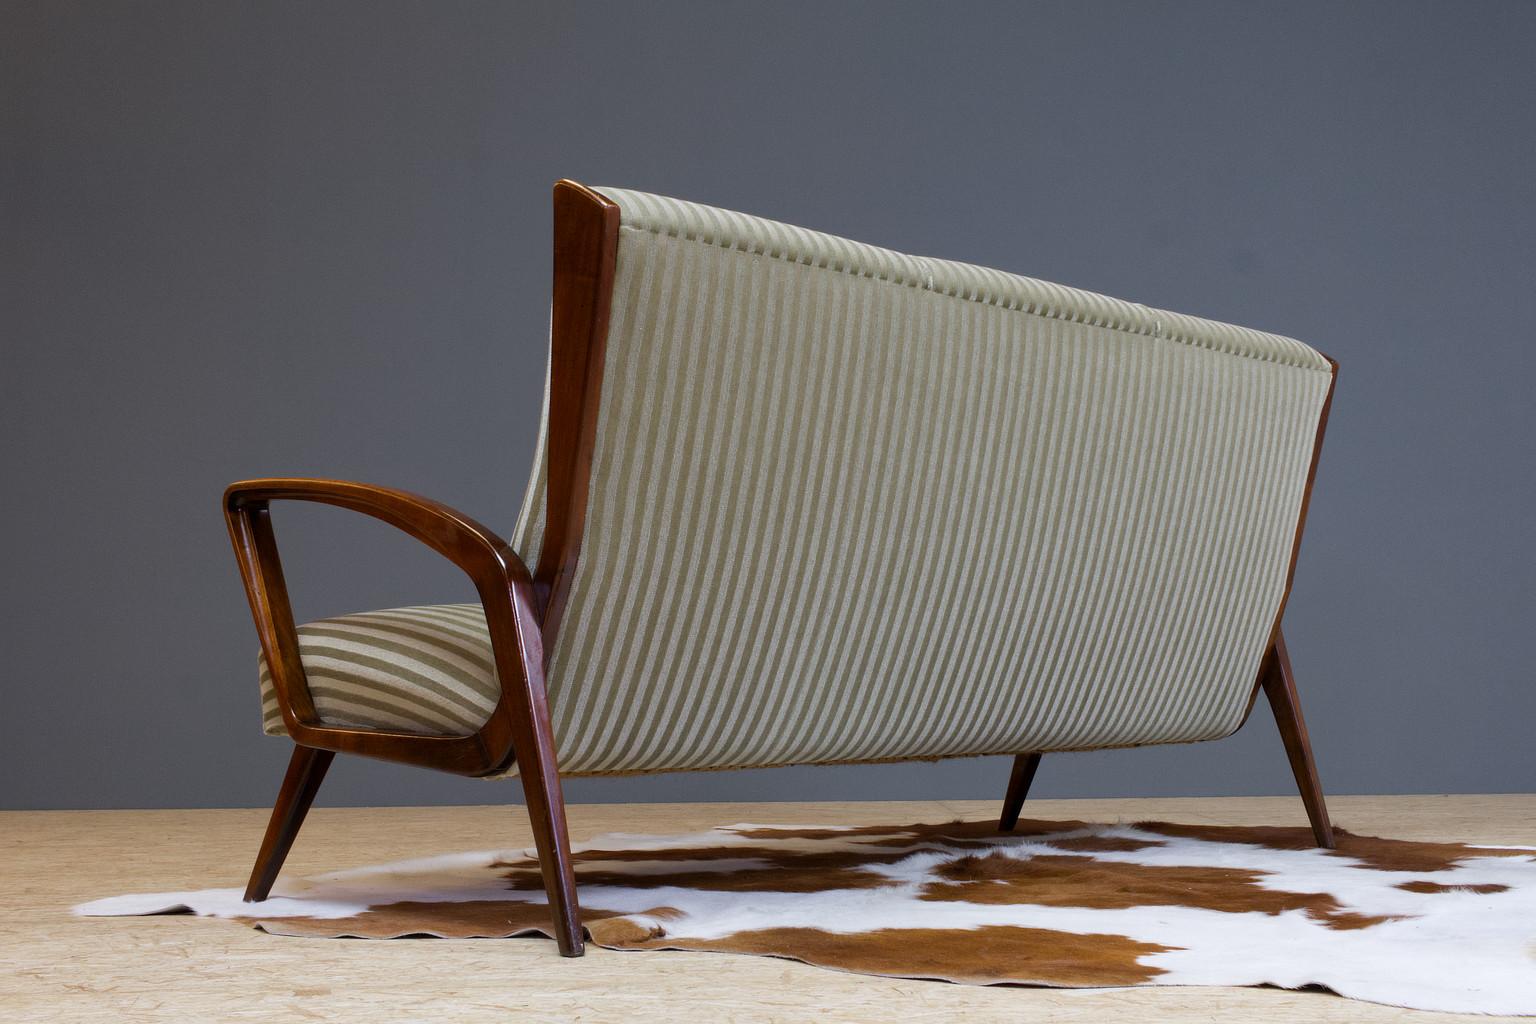 Mid-20th Century Art Deco Classic High Back Sofa by A.A.Patijn for Zijlstra 1950s Walnut Frame